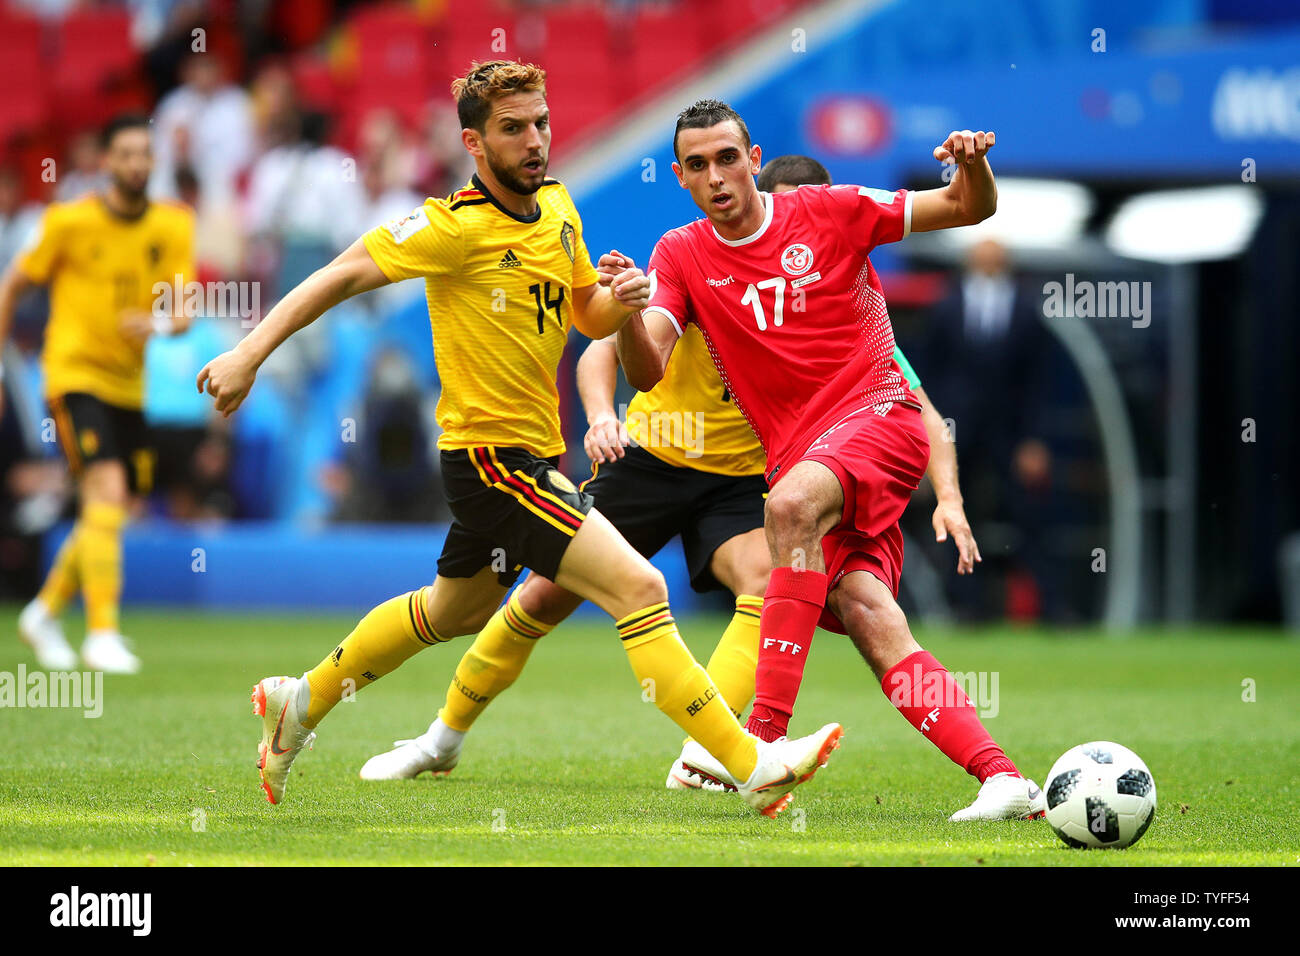 Dries Mertens of Belgium (L) in action with Ellyes Skhiri of Tunisia during the 2018 FIFA World Cup Group G match at the Spartak Stadium in Moscow, Russia on June 23, 2018. Belgium defeated Tunisia 5-2.     Photo by Chris Brunskill/UPI Stock Photo